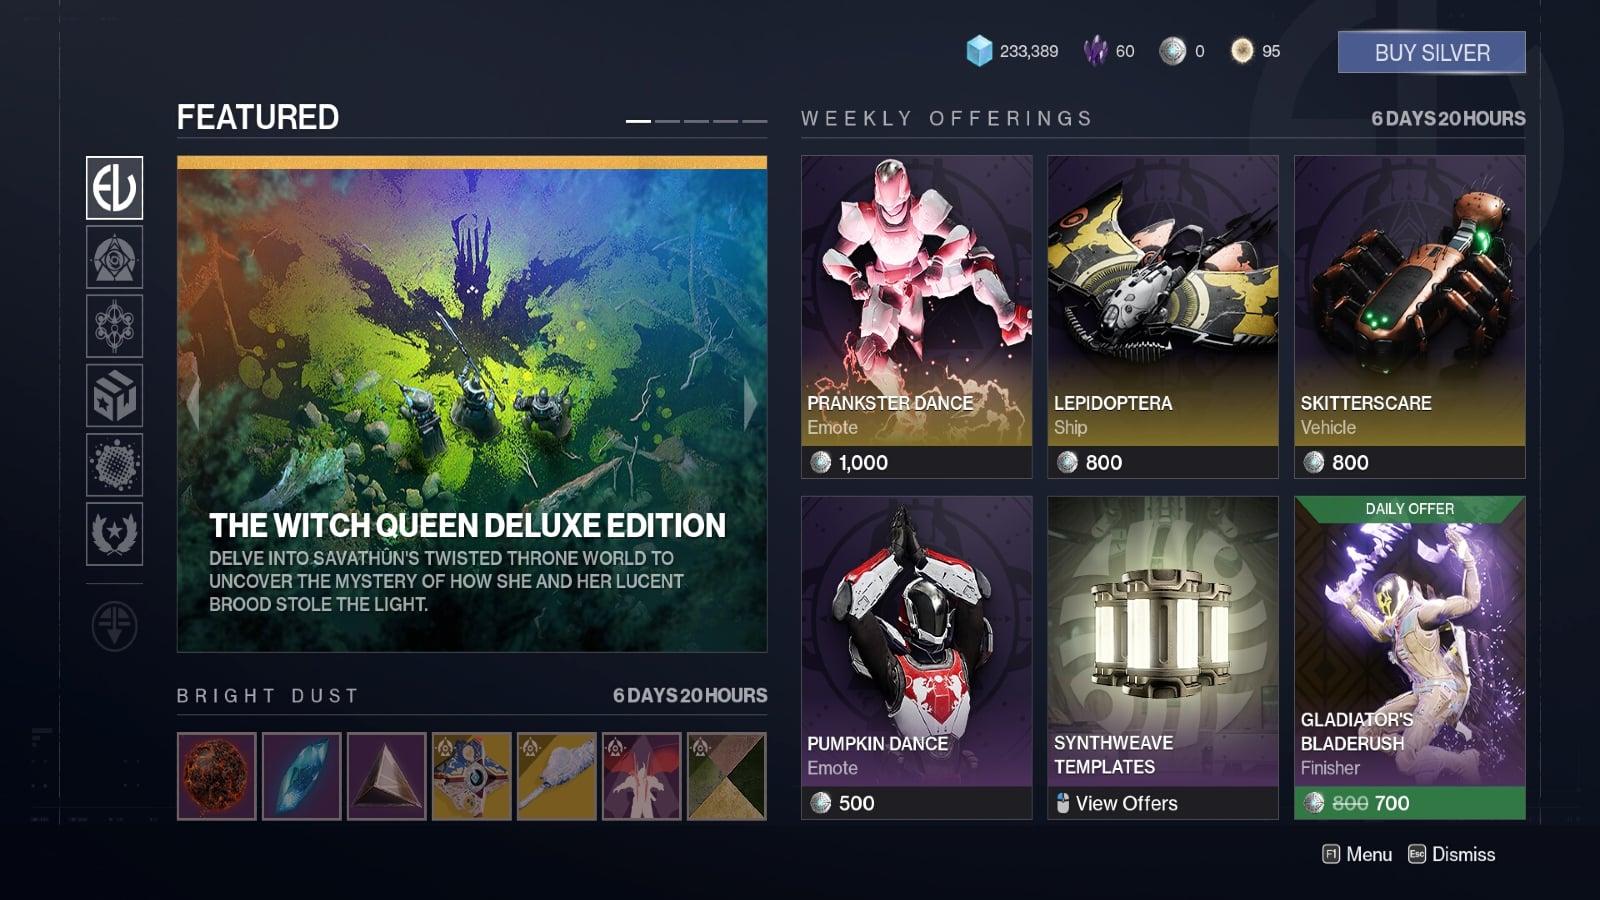 Destiny 2 Eververse store with Witch Queen promo